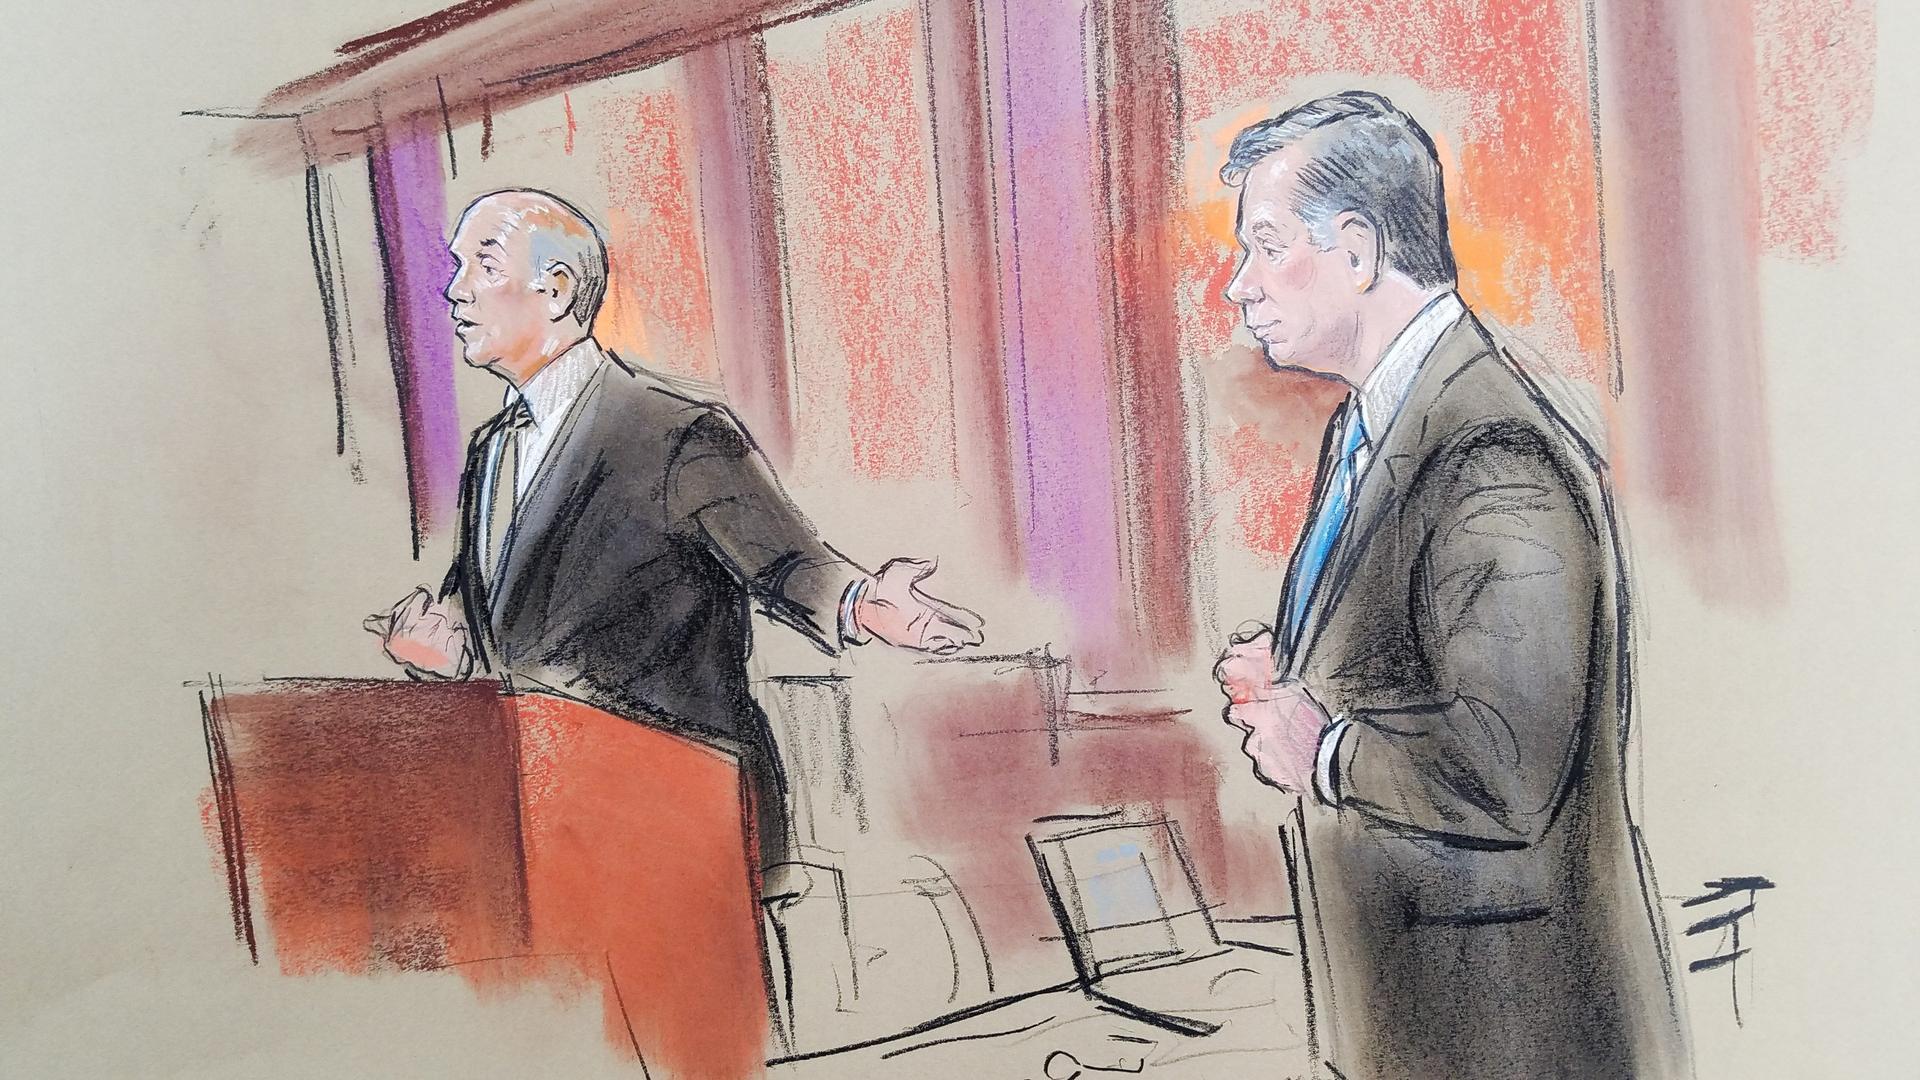 Attorney Tom Zehnle gestures with his left arm to his client, former Trump campaign manager Paul Manafort, in a court room sketch.